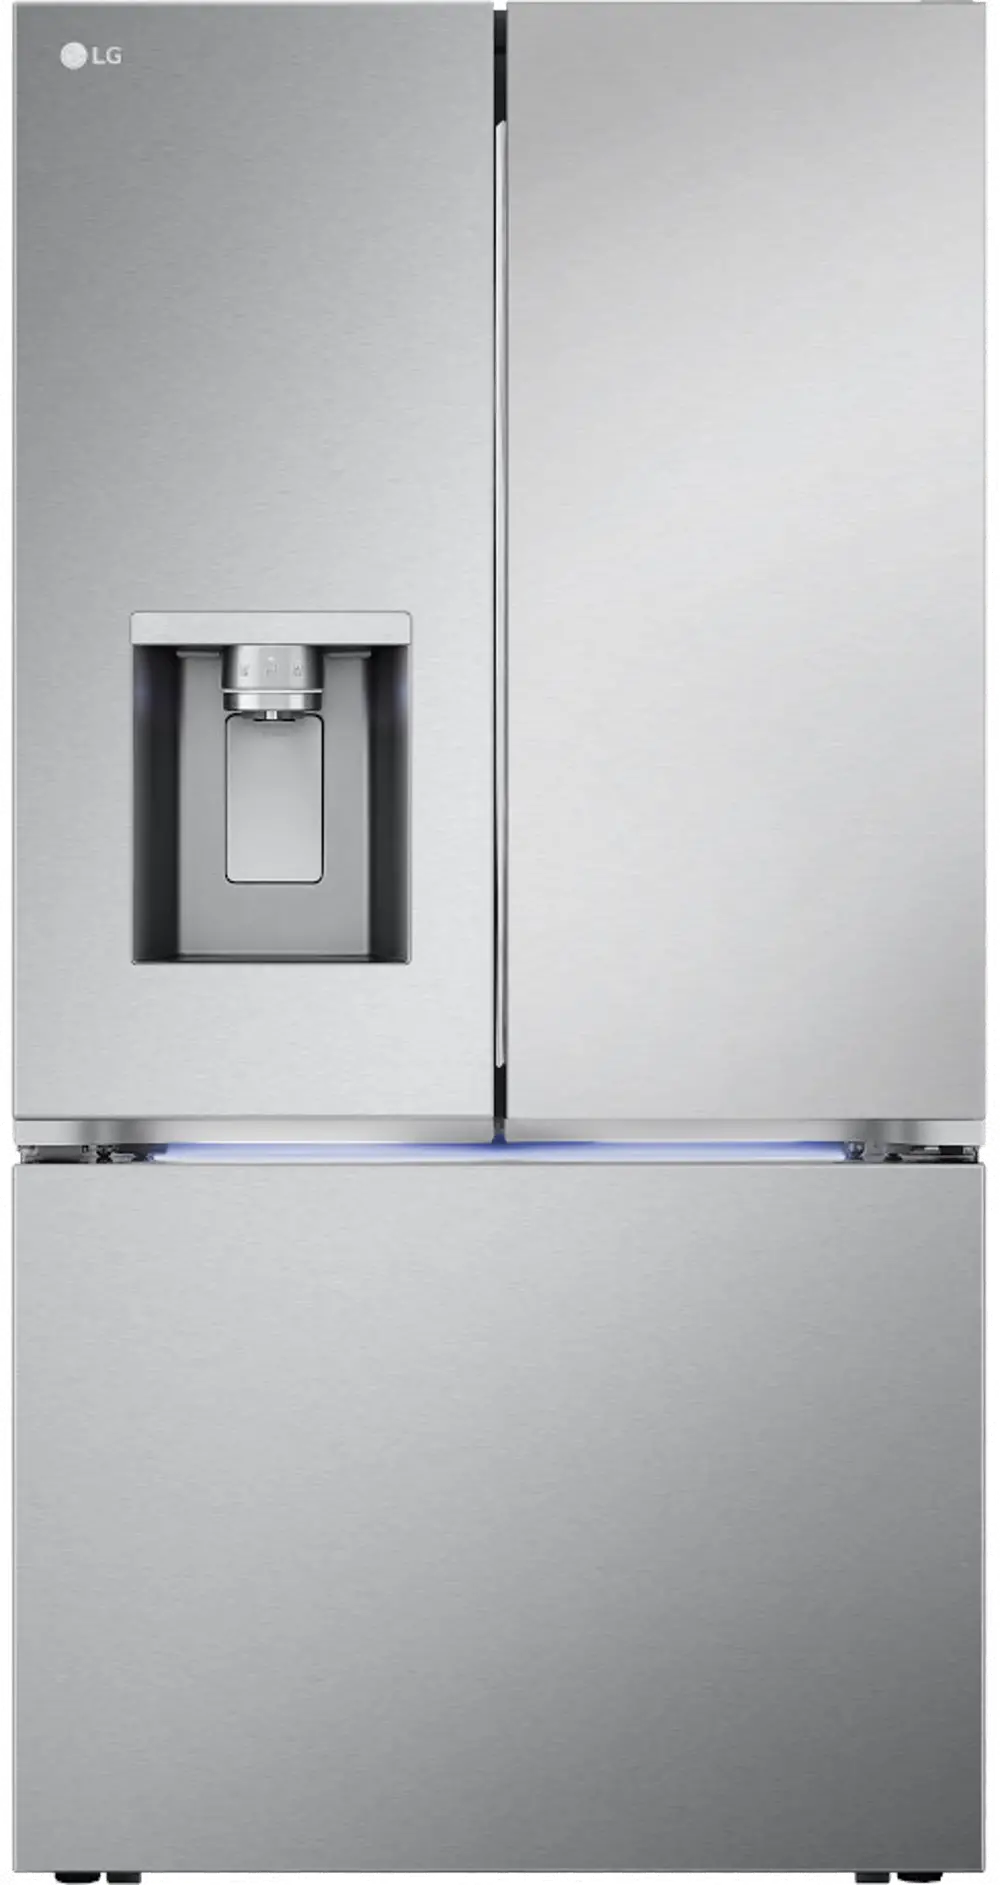 LRYXS3106S LG 30.7 Cu Ft French Door Refrigerator - Stainless Steel-1